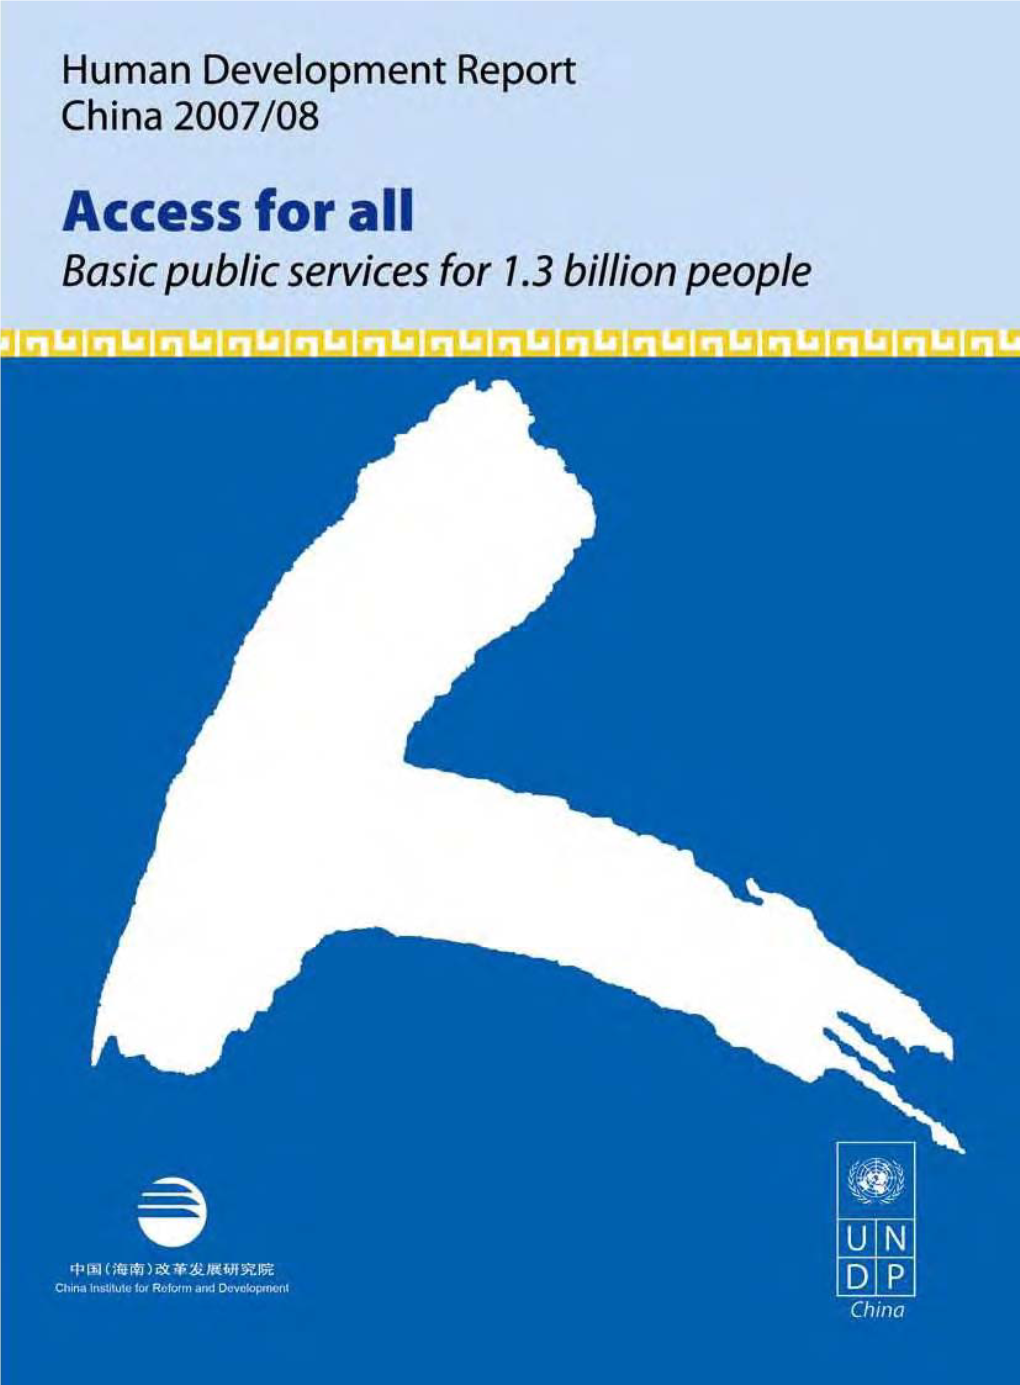 CHINA HUMAN DEVELOPMENT REPORT 2007/08 Access for All: Basic Public Services for 1.3 Billion People